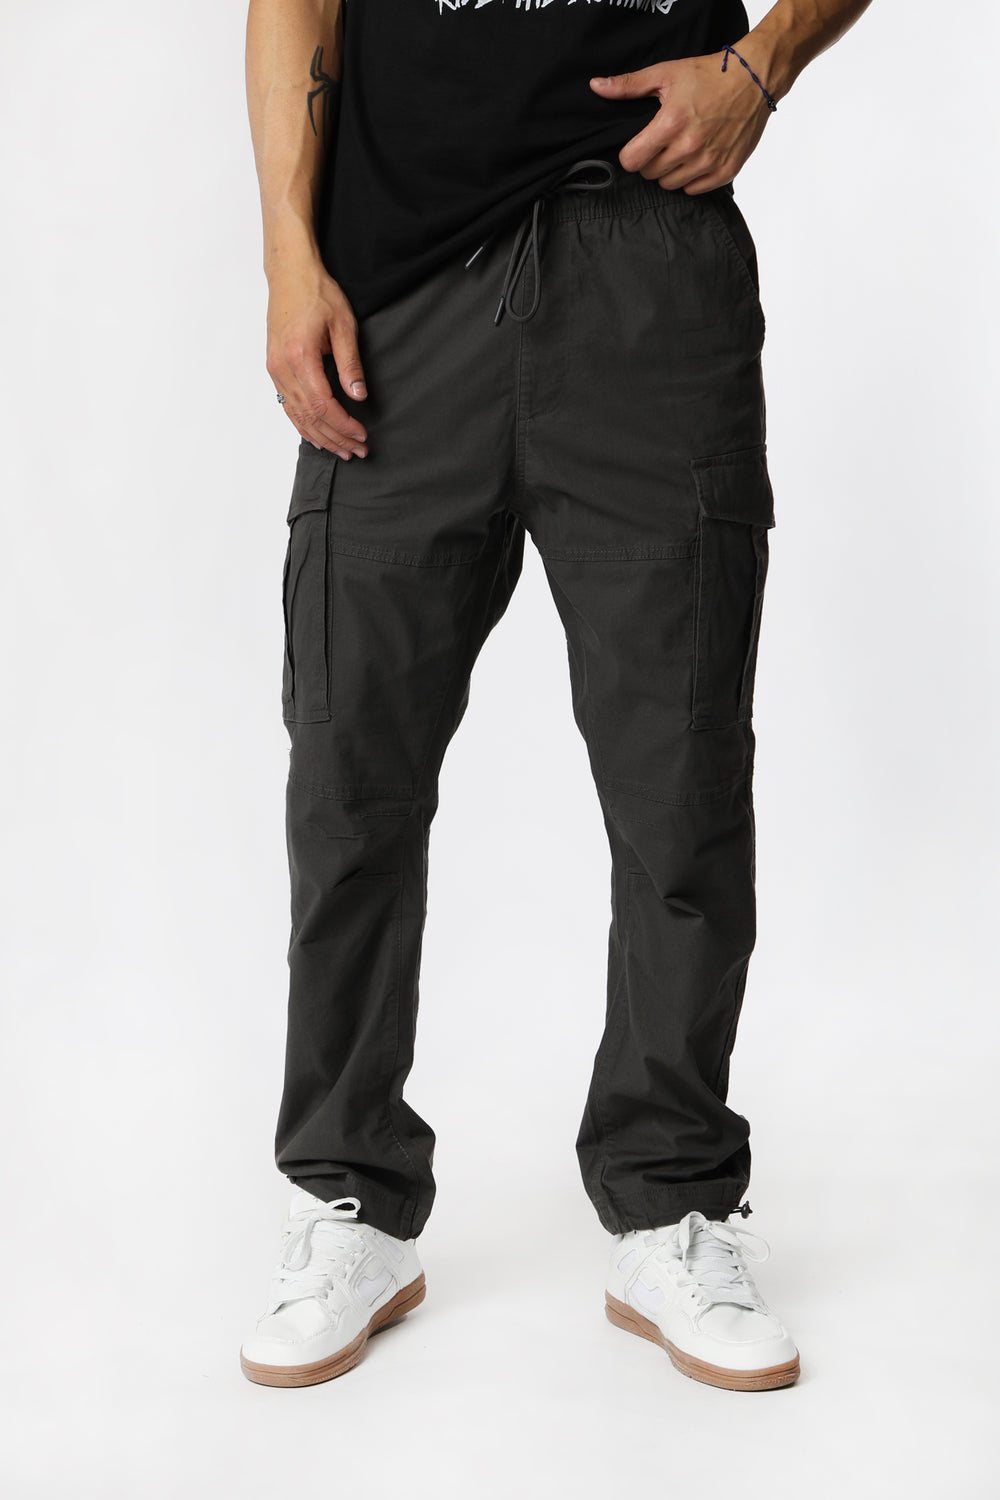 West49 Mens Ripstop Bungee Cargo Jogger West49 Mens Ripstop Bungee Cargo Jogger